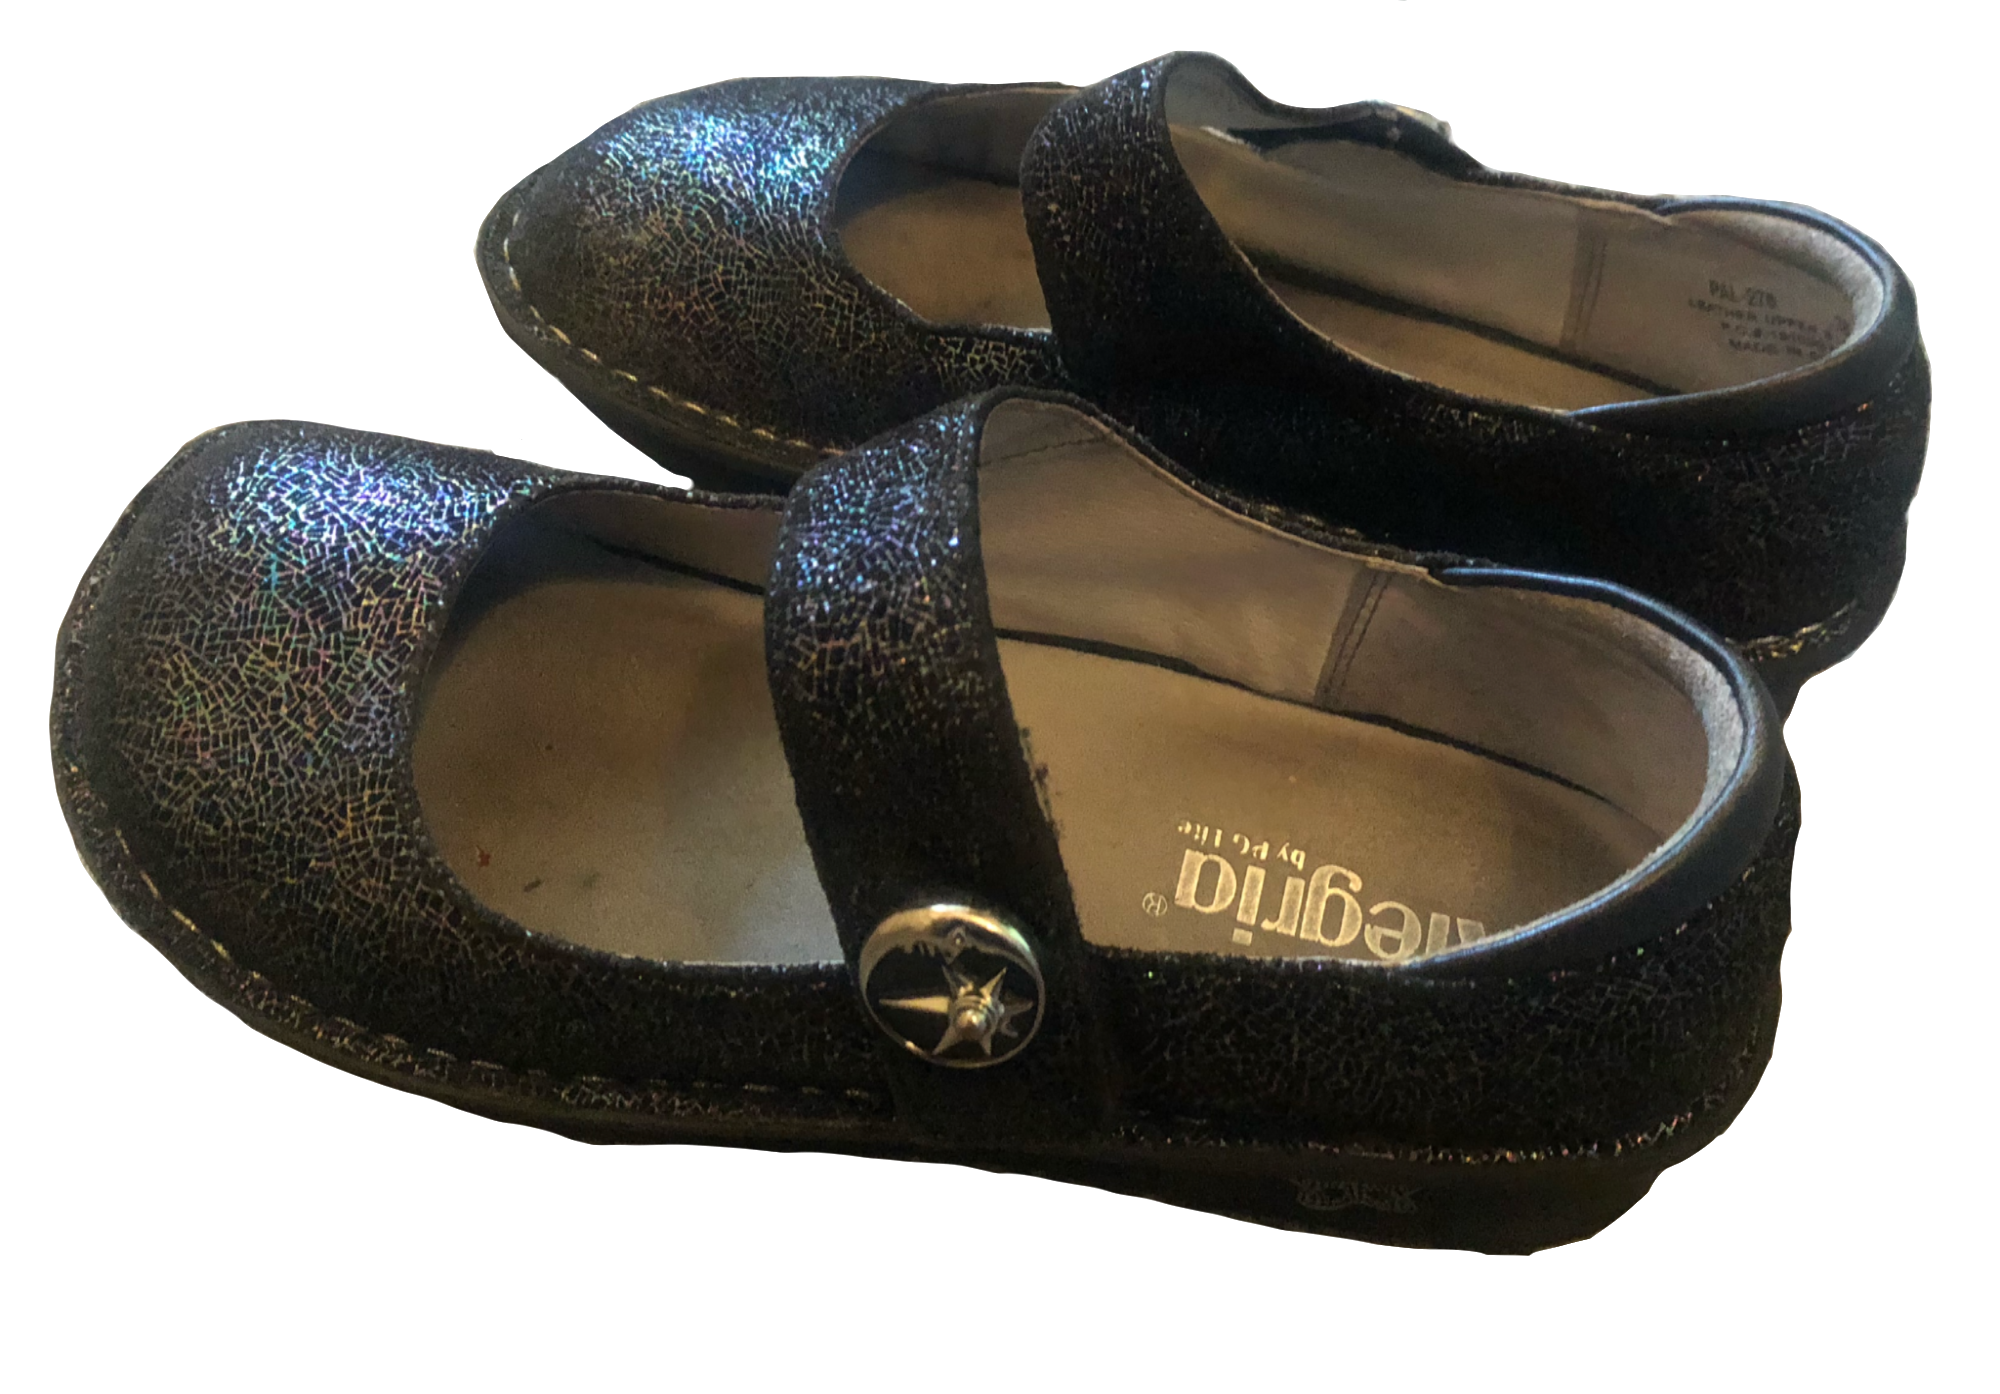 A pair of dark sparkled mary janes from Alegria. They have velcro straps, with a sun and moon charm.